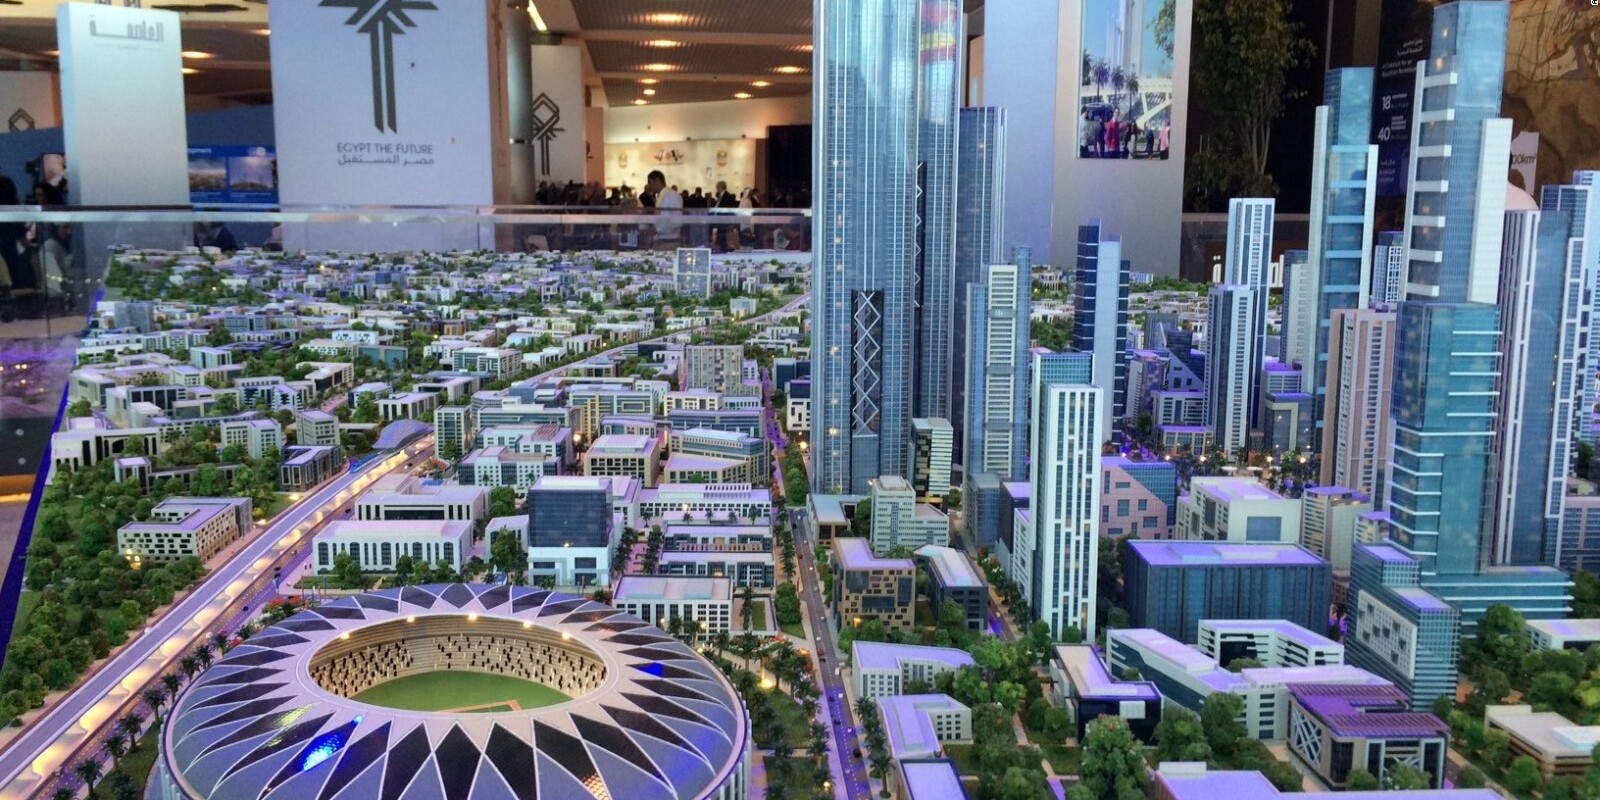 THE NEW EGYPTIAN ADMINISTRATIVE CAPITAL SERVES SYMBOLIC AND ECONOMIC OBJECTIVES